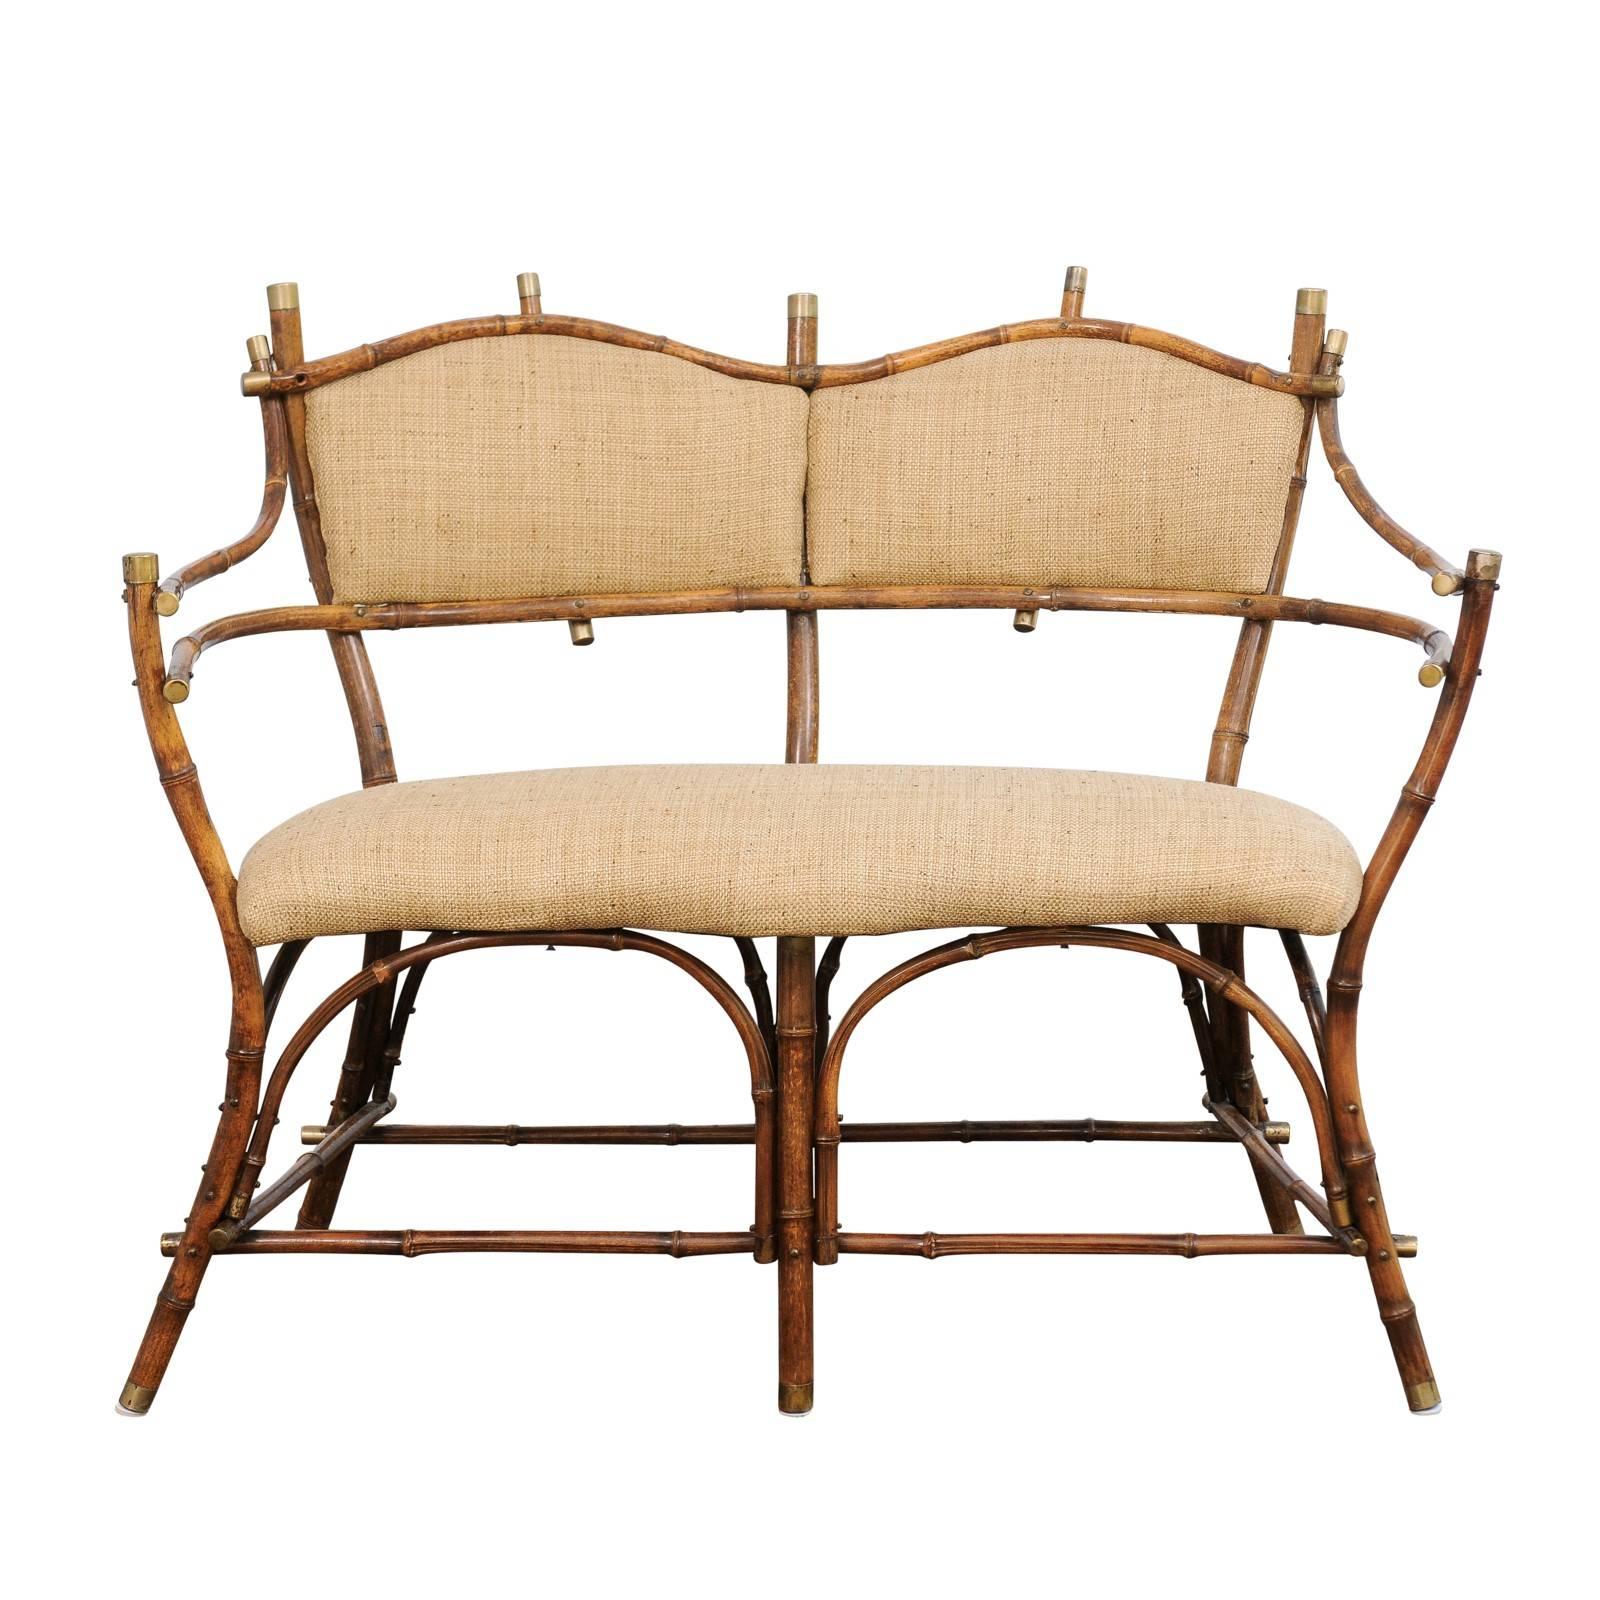 English Edwardian Period Bamboo Settee with Upholstered Back and Seat